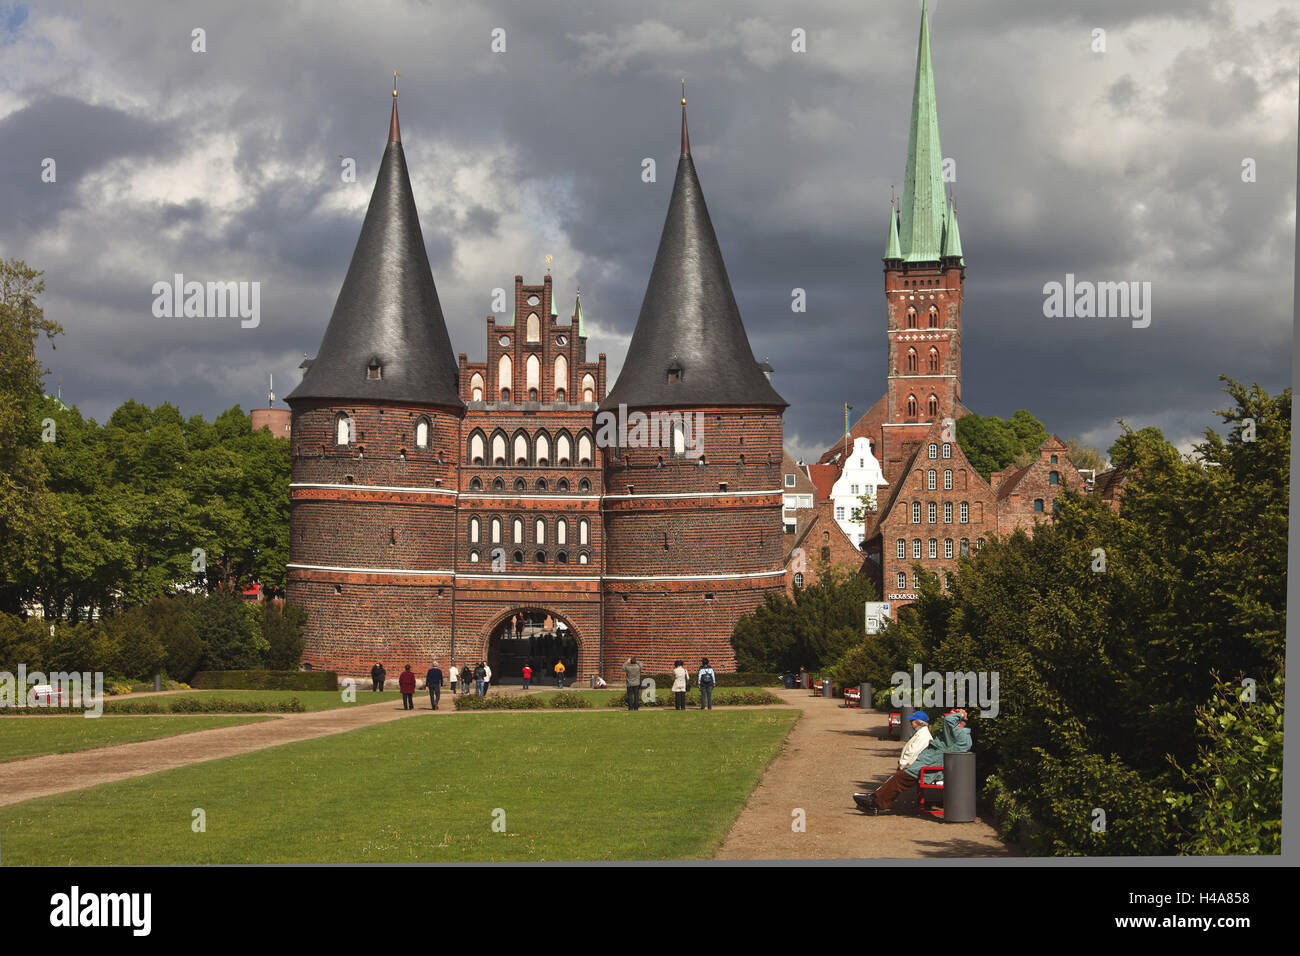 Germany, Schleswig - Holstein, Holstentor, church, piece Peter, Lübeck, town, Hanse, the Baltic Sea, goal, architecture, Hanseatic town, towers, place of interest, landmark, structure, tourist, pedestrian, summer, thunderstorm, stormy atmosphere, meadow, Stock Photo